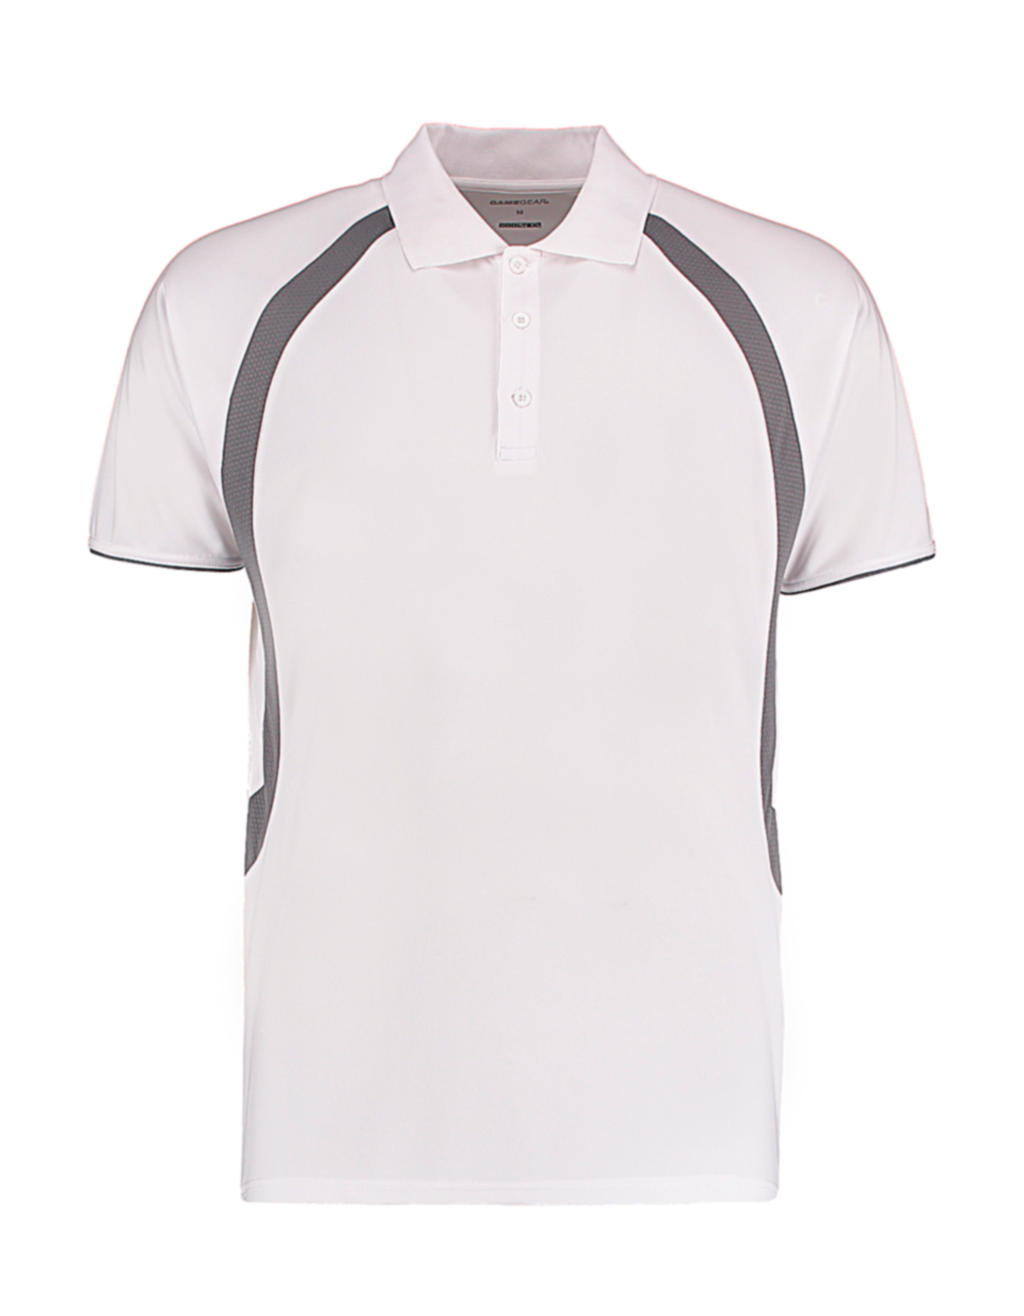 550.11 / Classic Fit Cooltex® Riviera Polo Shirt / White/Grey